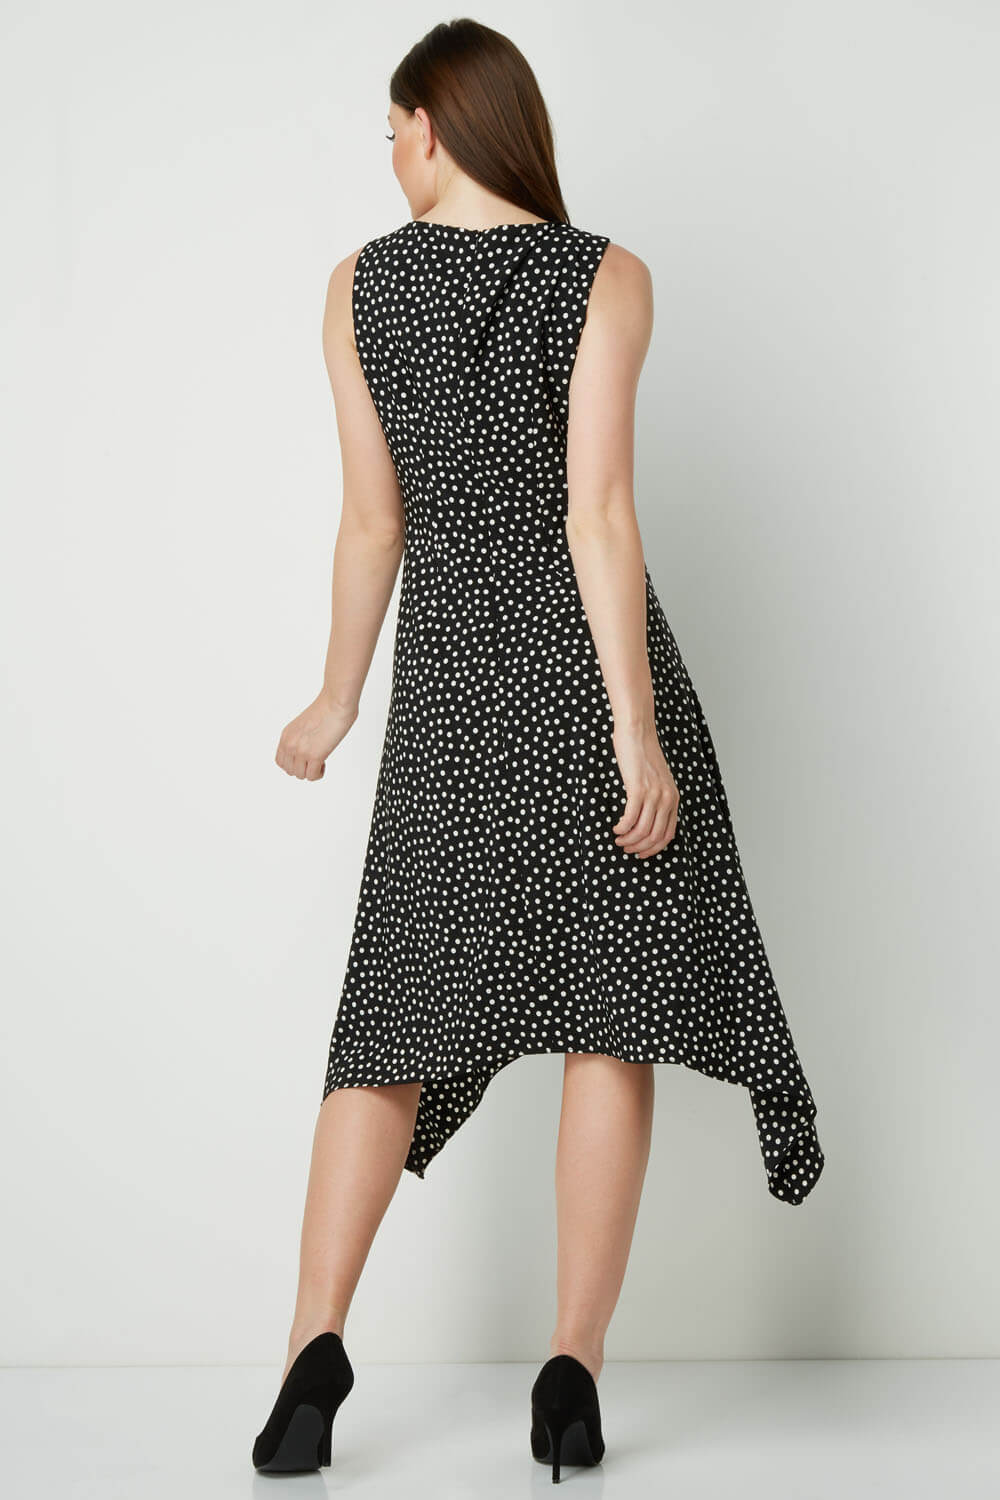 Black Zip Detail Fit and Flare Spot Dress, Image 3 of 4